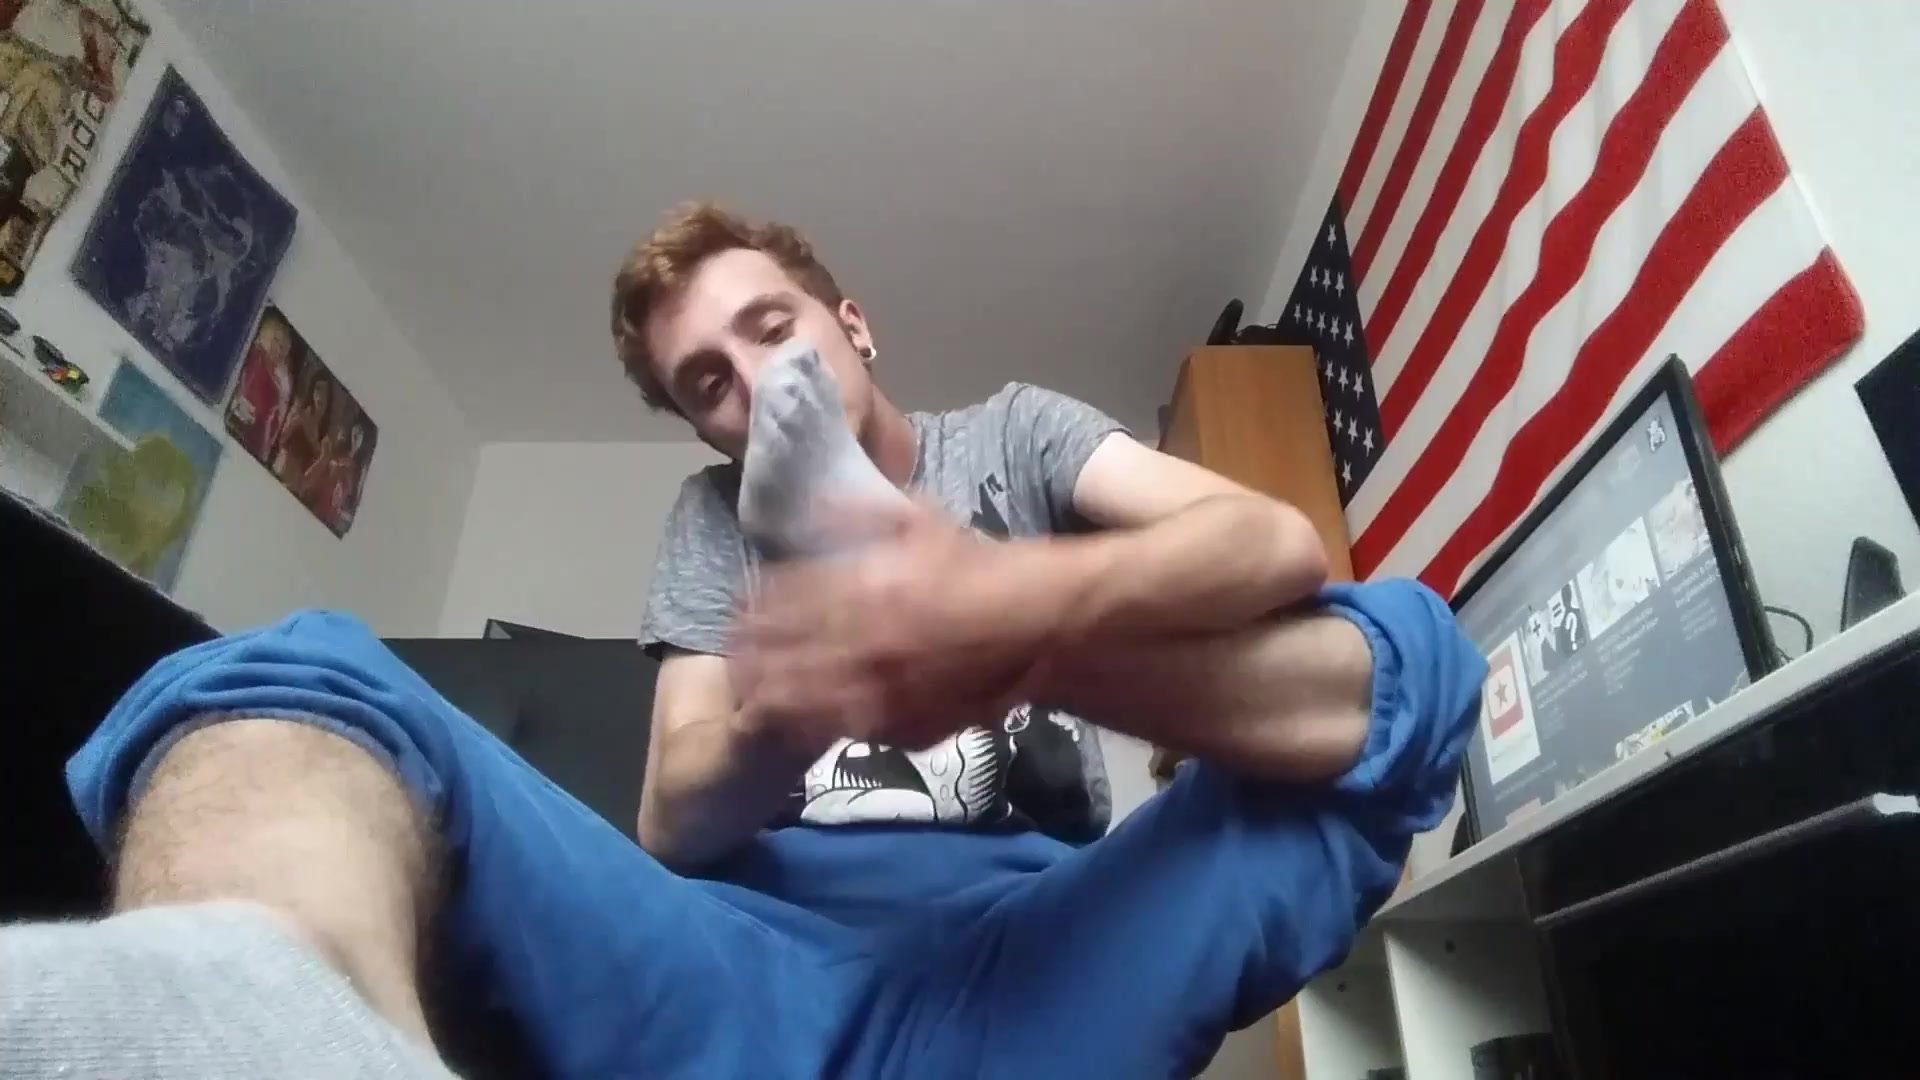 Twink shows off his feet